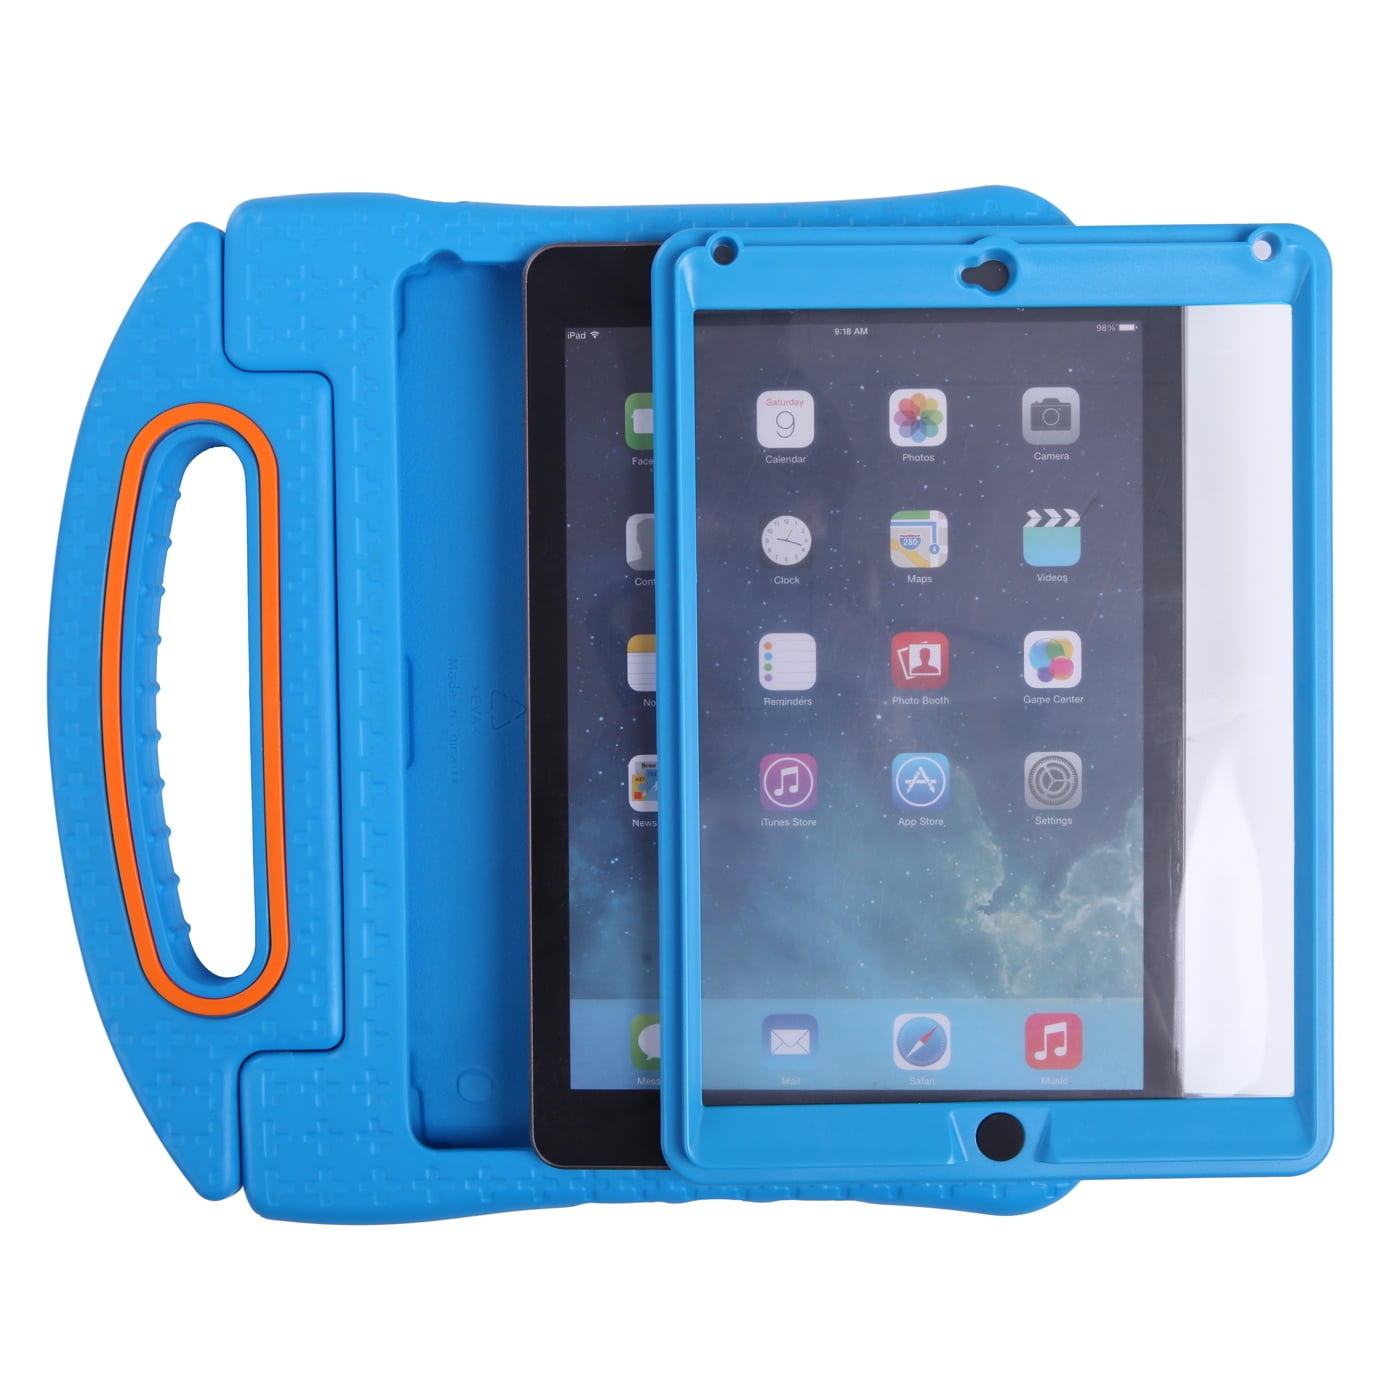 Skalk Regeren rijm HDE iPad Air 2 Bumper Case for Kids Shockproof Hard Cover Handle Stand with  Built in Screen Protector for Apple iPad Air 2 (Blue) - Walmart.com